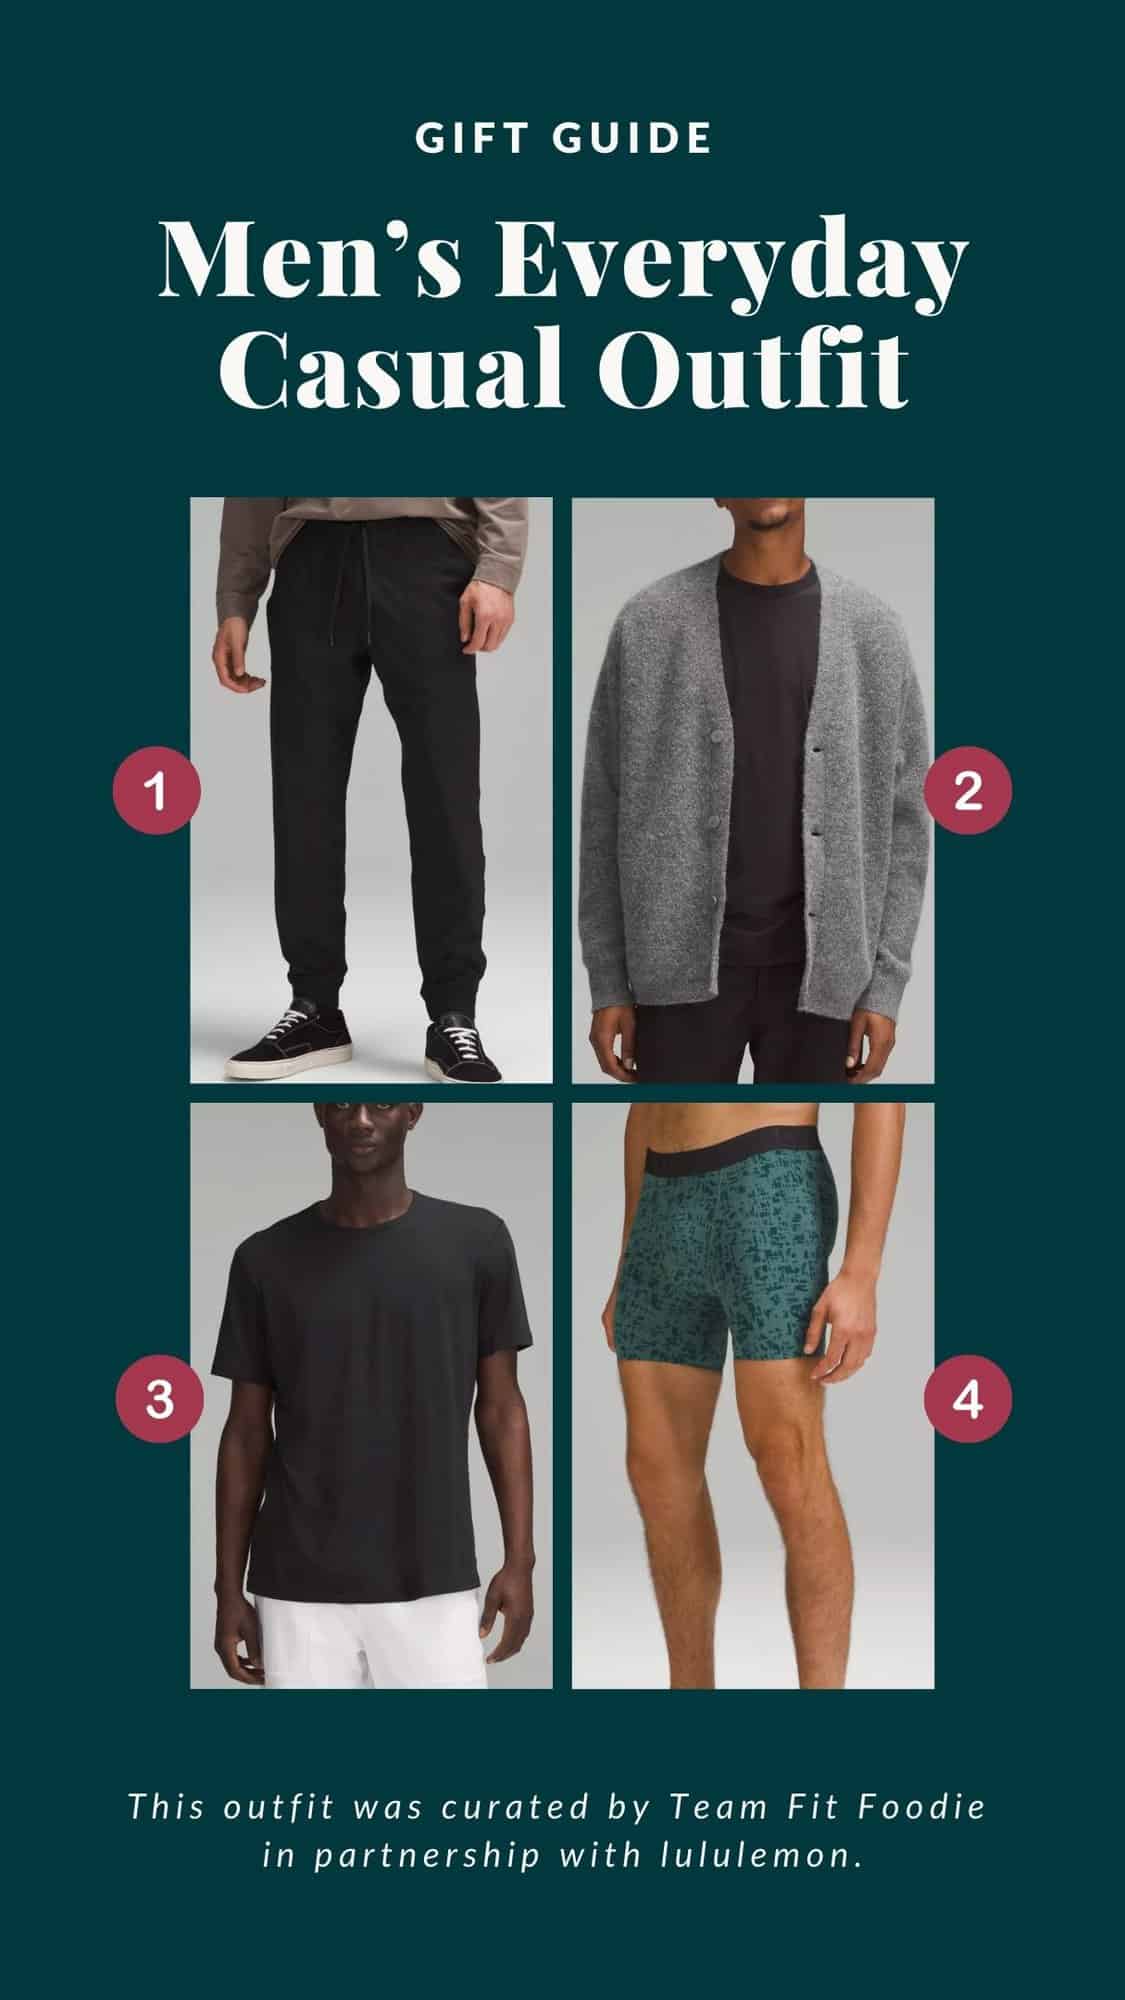 Men's everyday casual outfit gift guide.